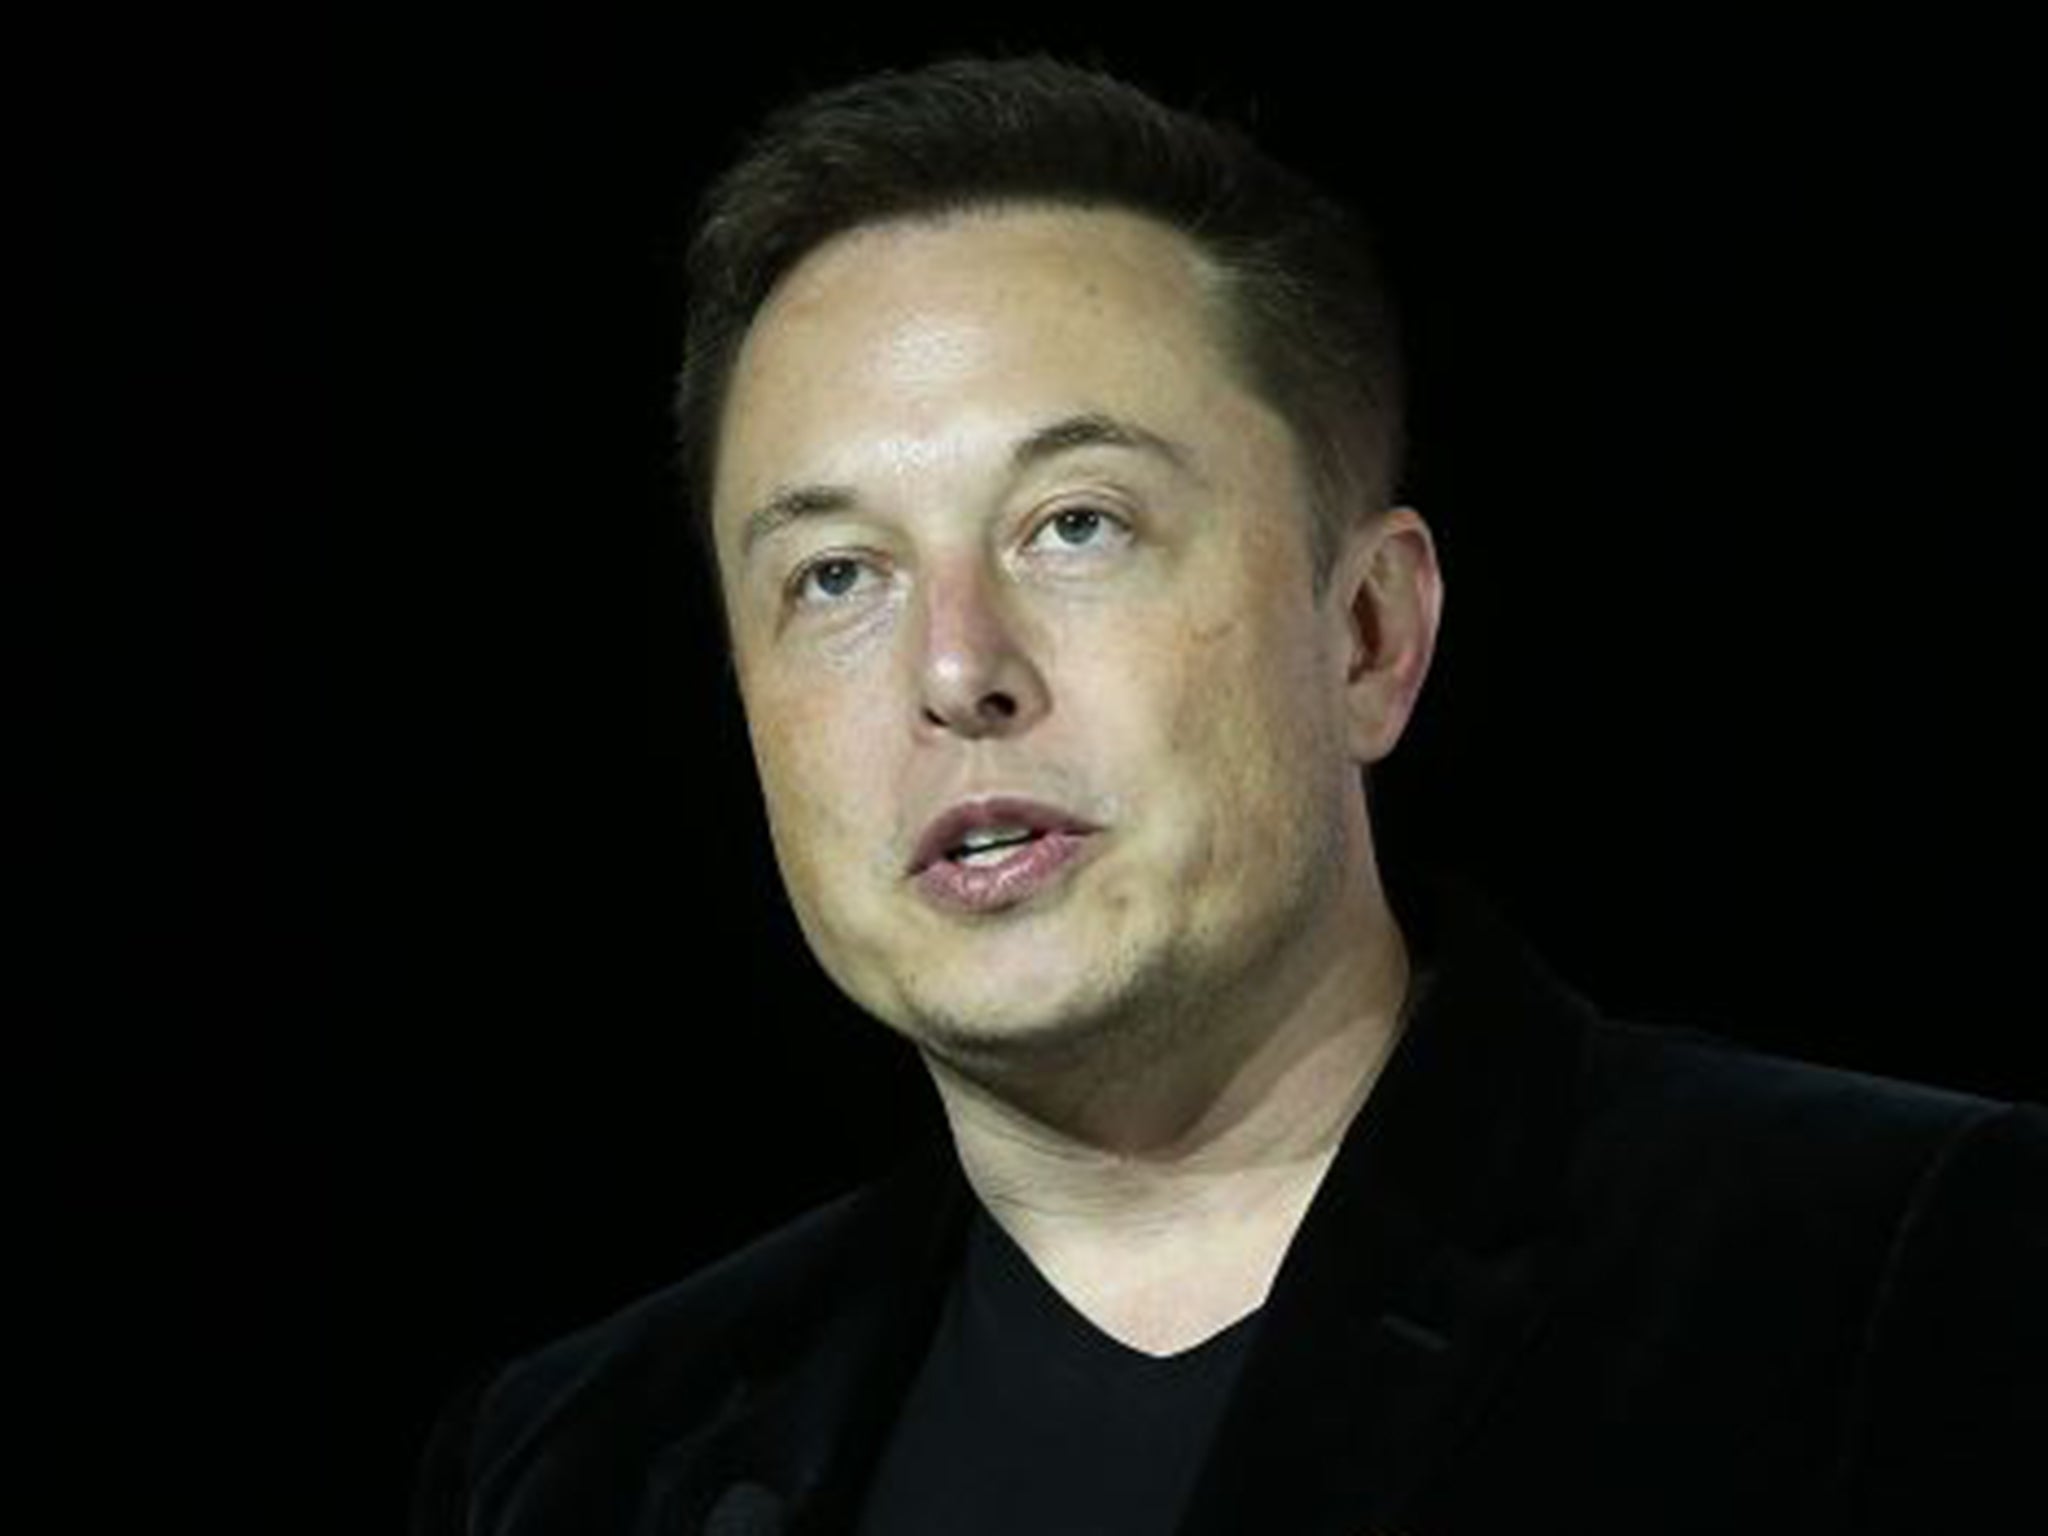 Elon Musk made his name as a co-founder of online payments giant PayPal